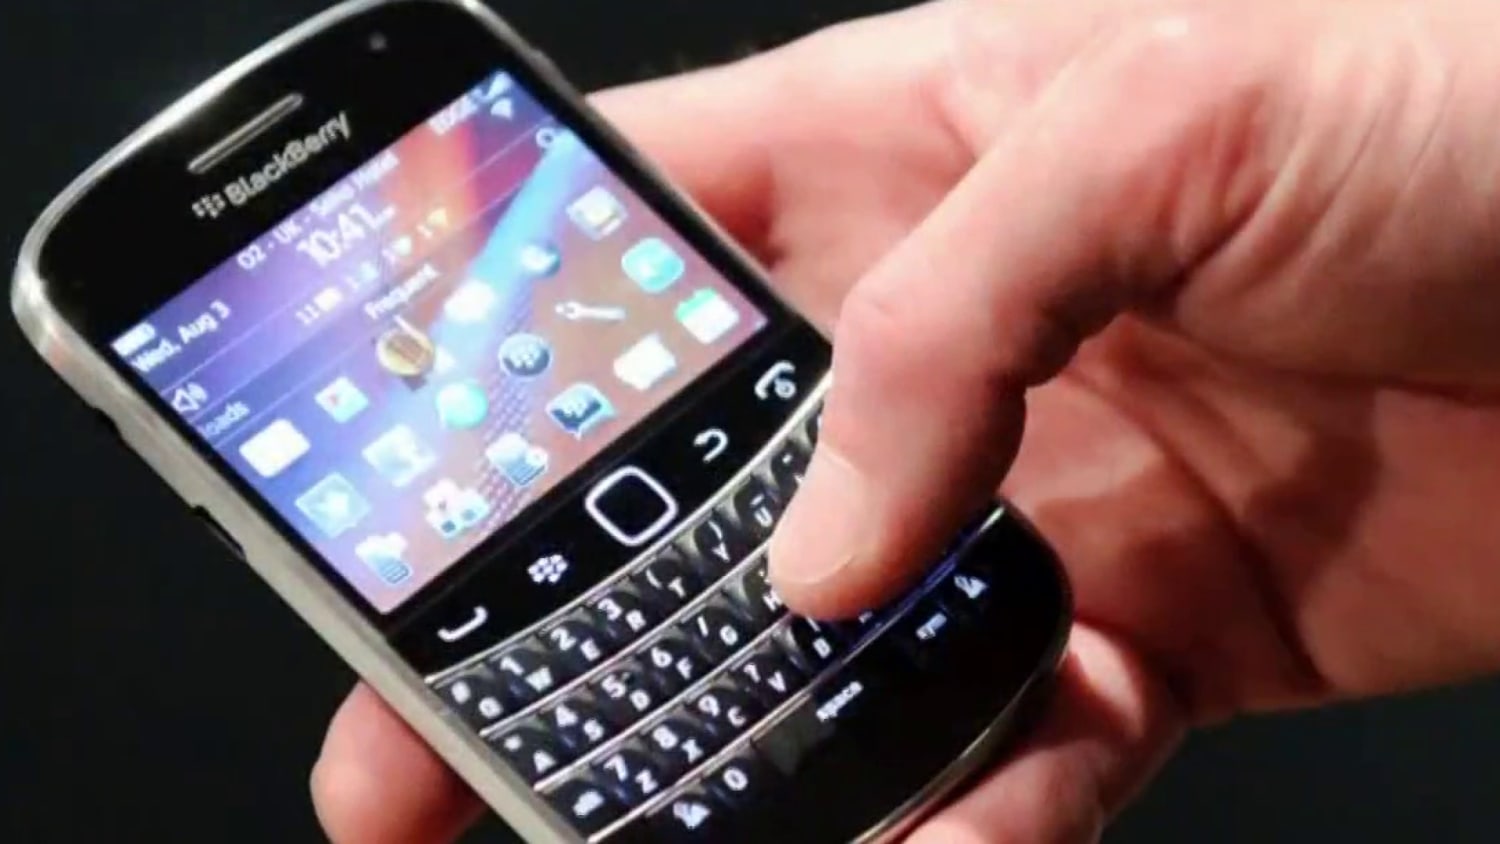 Classic BlackBerry devices to stop working normally Tuesday